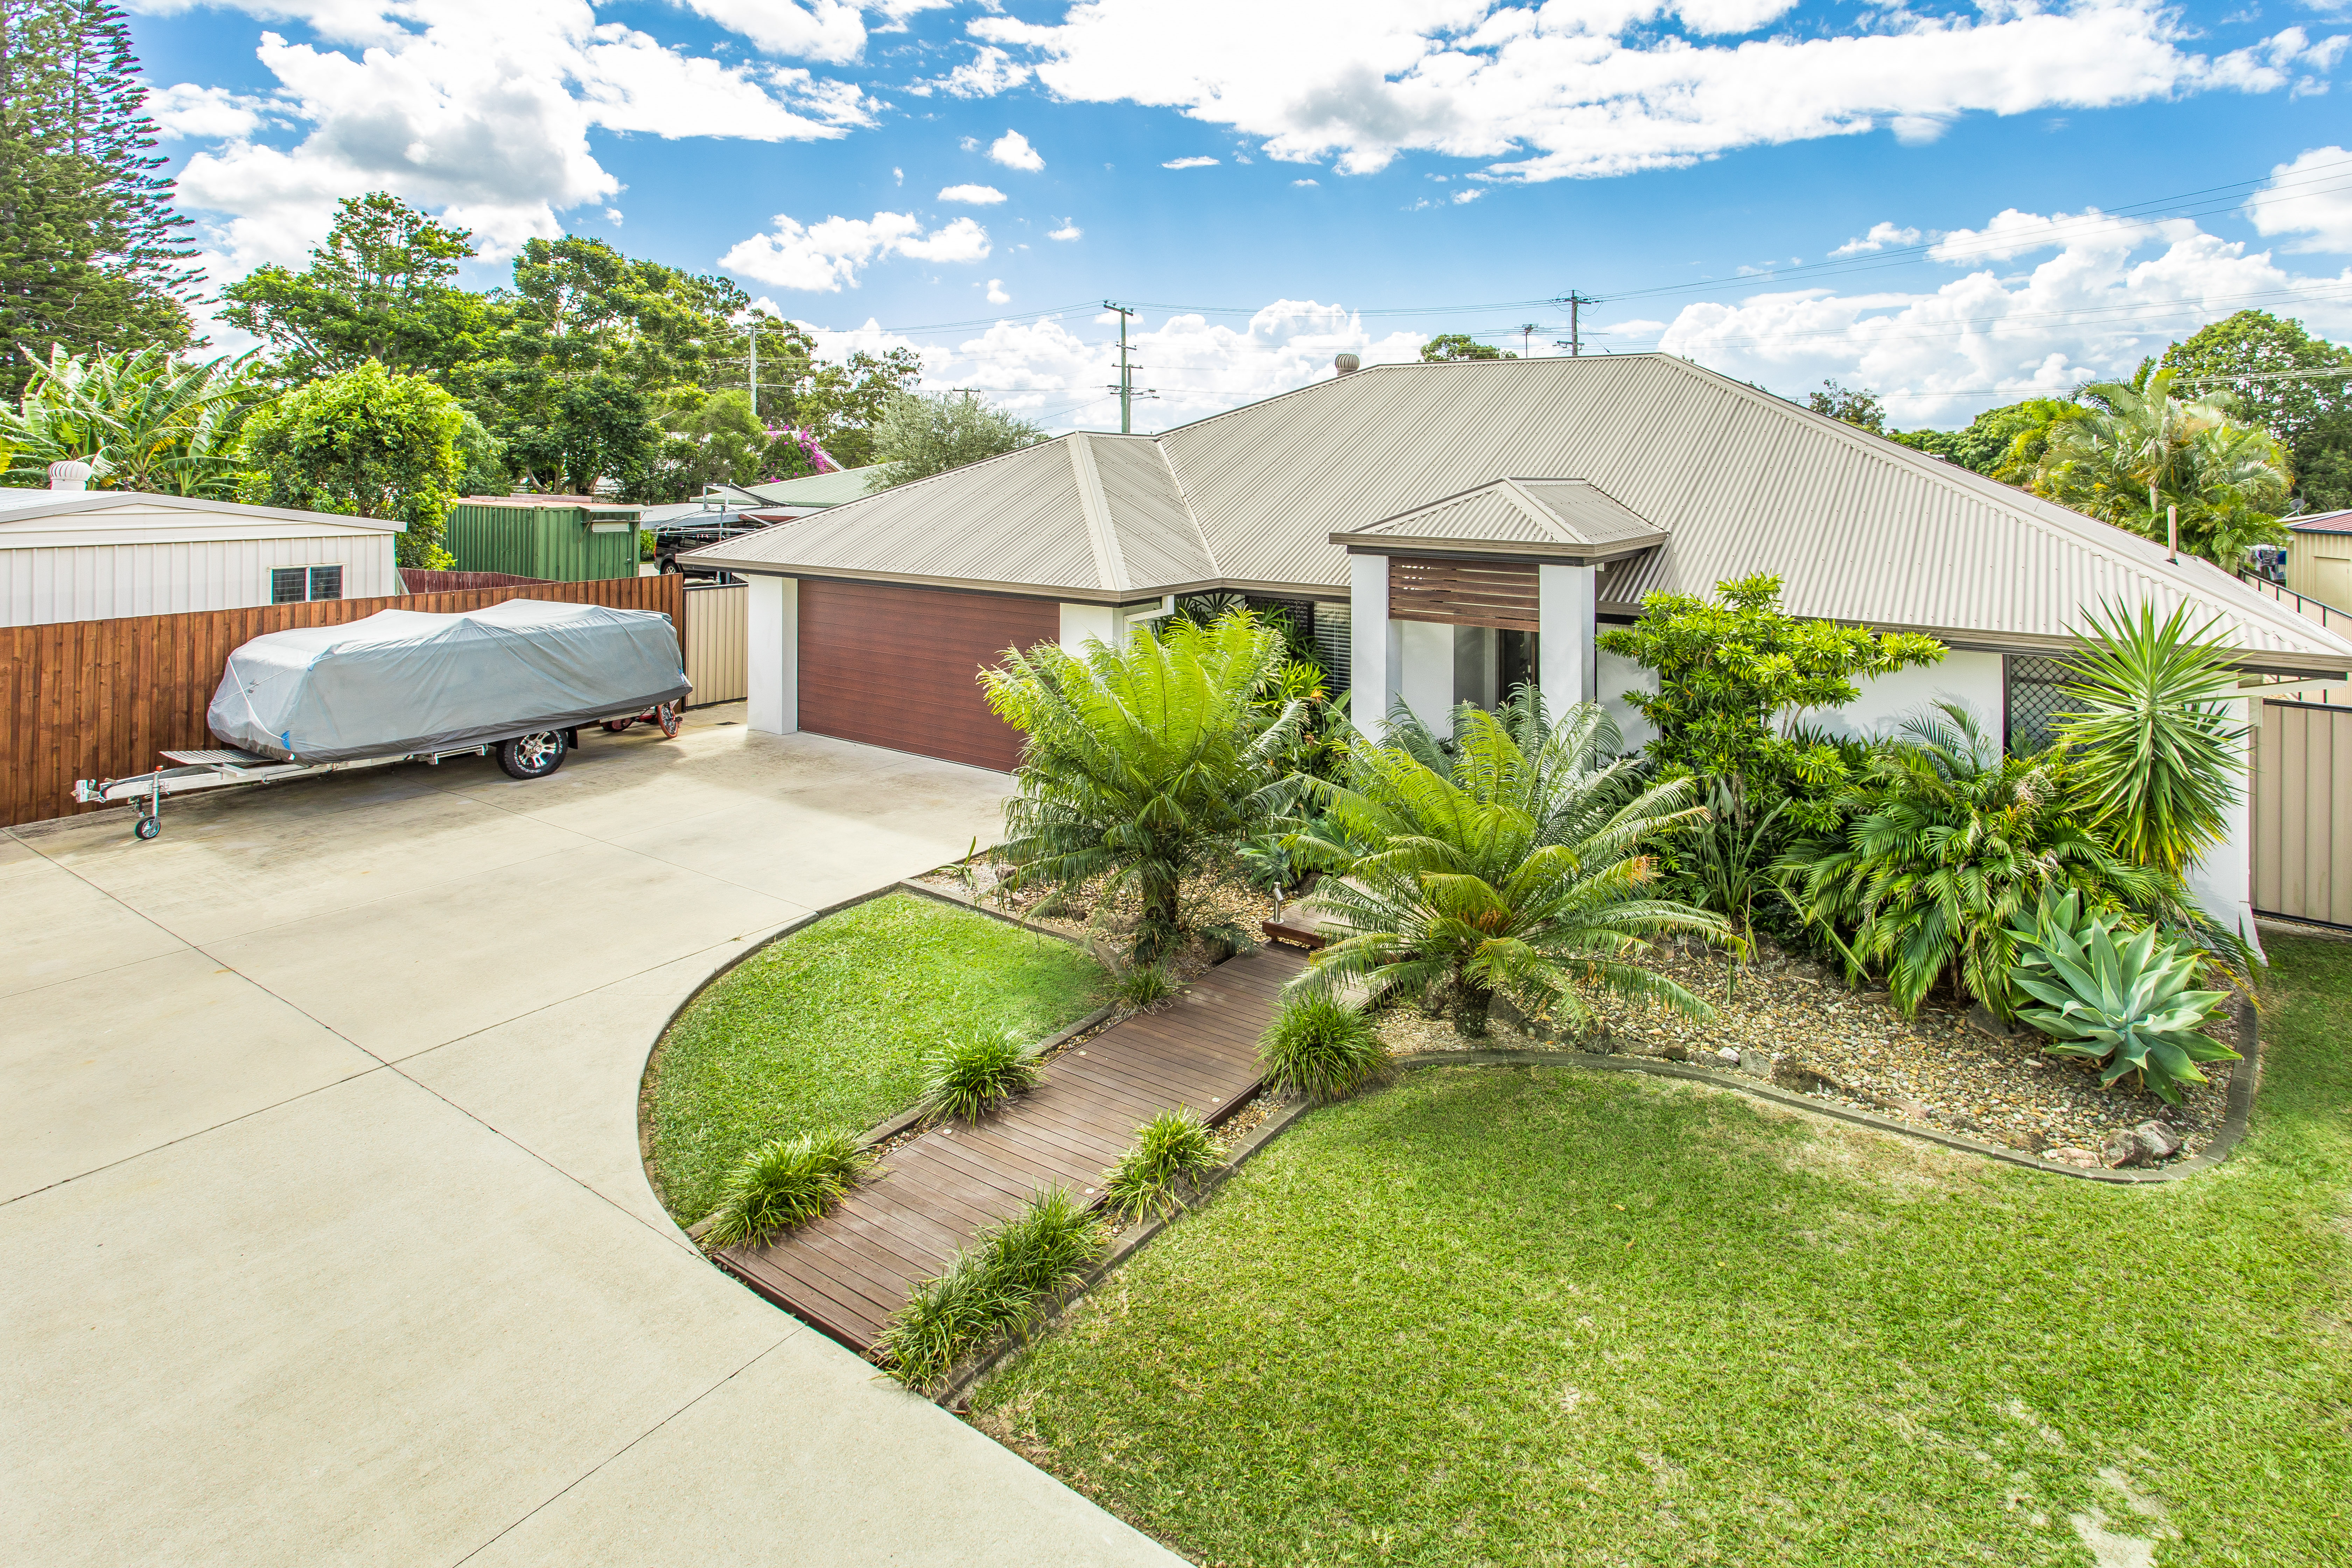 FOR SALE - 30 Fairway Crt, Caboolture